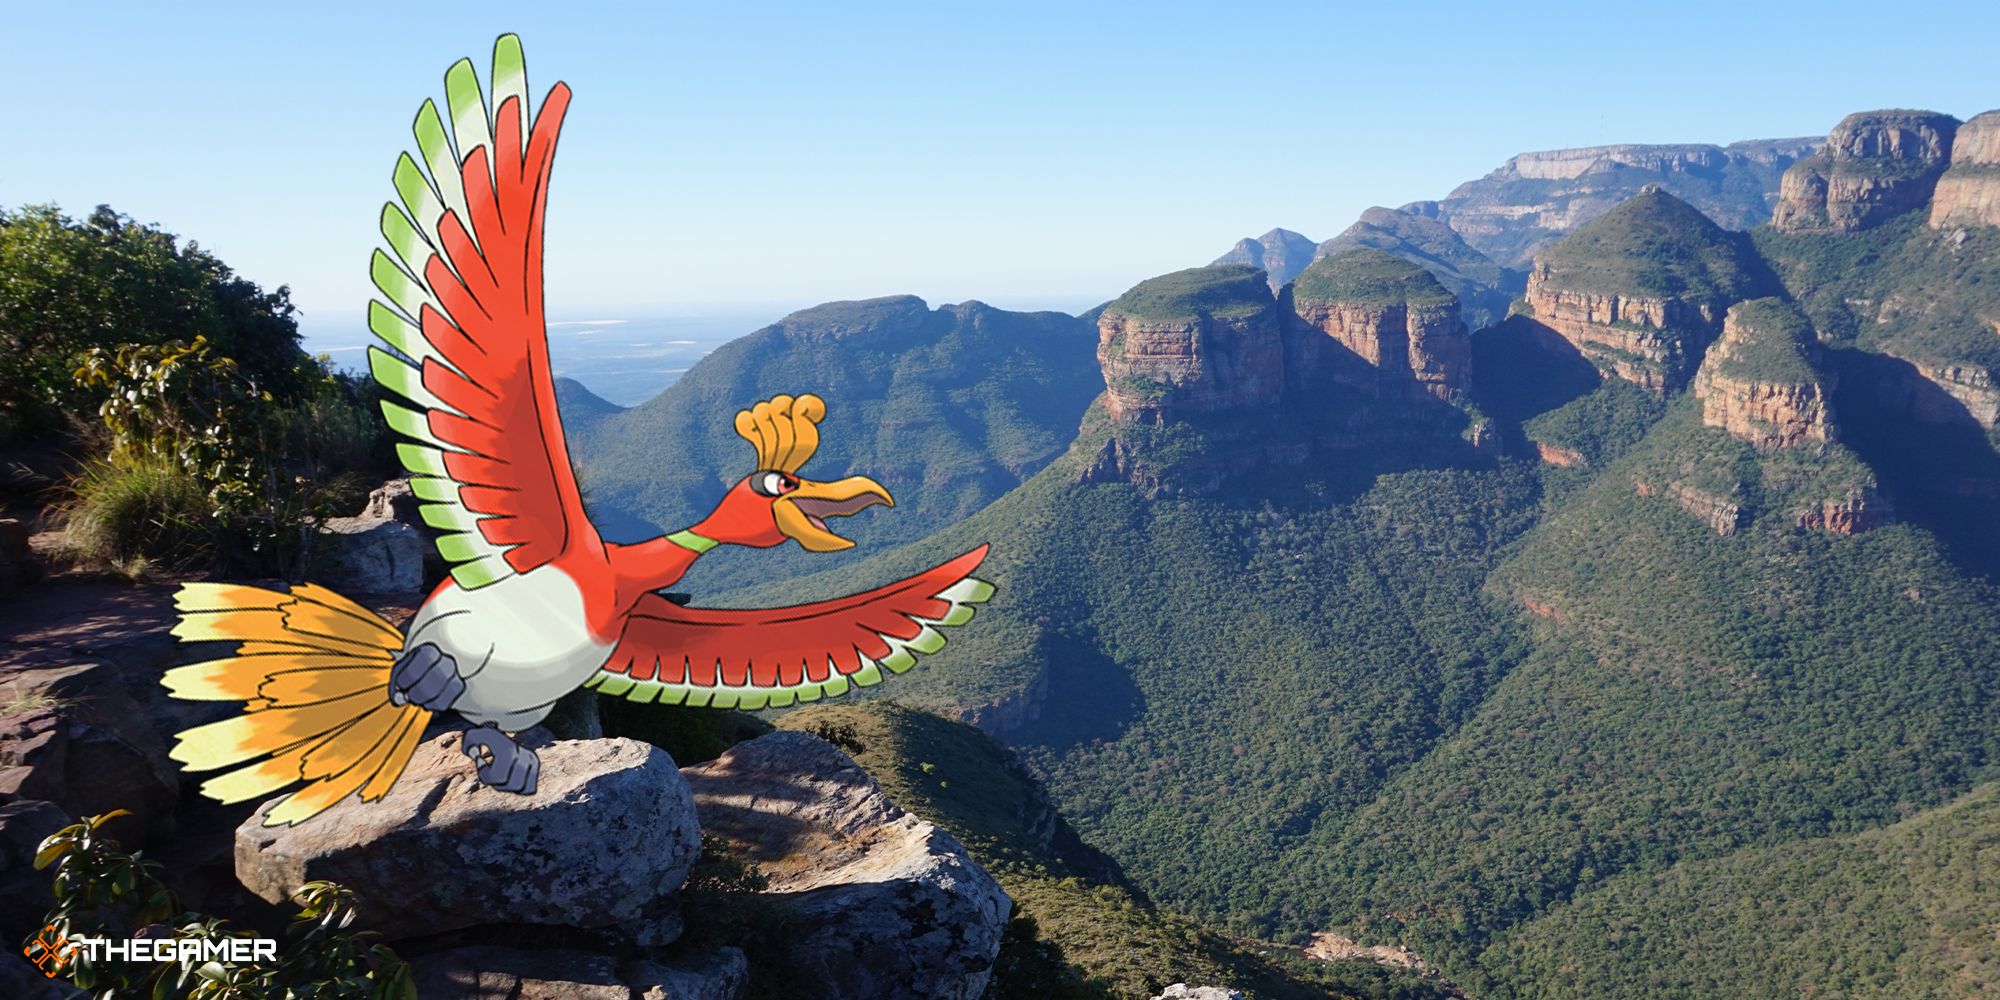 Pokemon - Ho-Oh at the Three Rondavels, South Africa